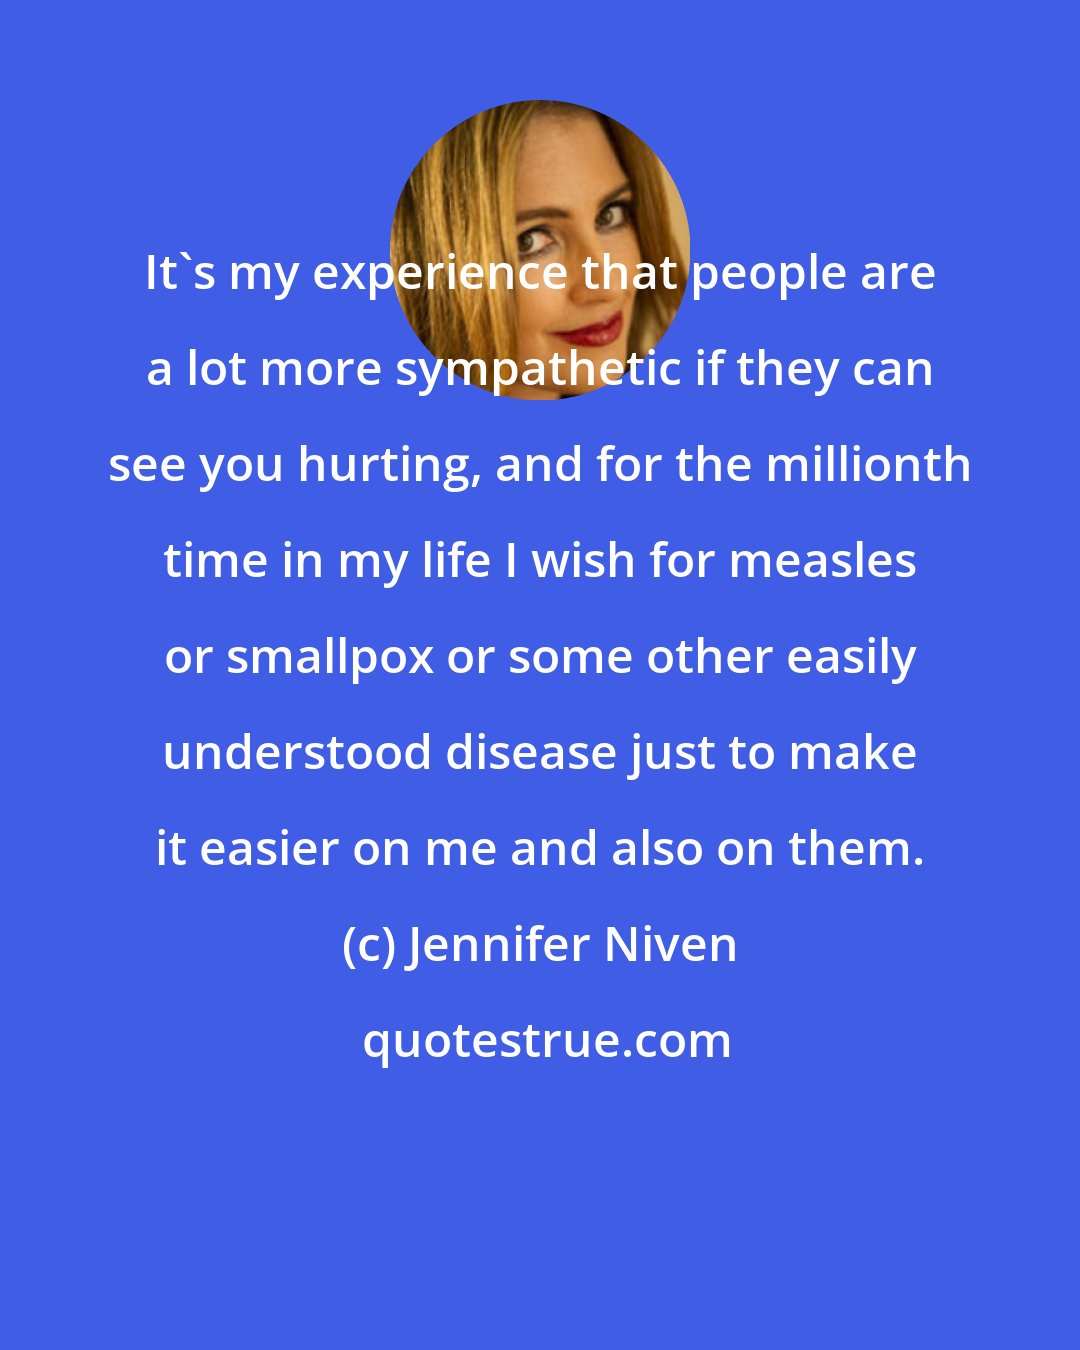 Jennifer Niven: It's my experience that people are a lot more sympathetic if they can see you hurting, and for the millionth time in my life I wish for measles or smallpox or some other easily understood disease just to make it easier on me and also on them.